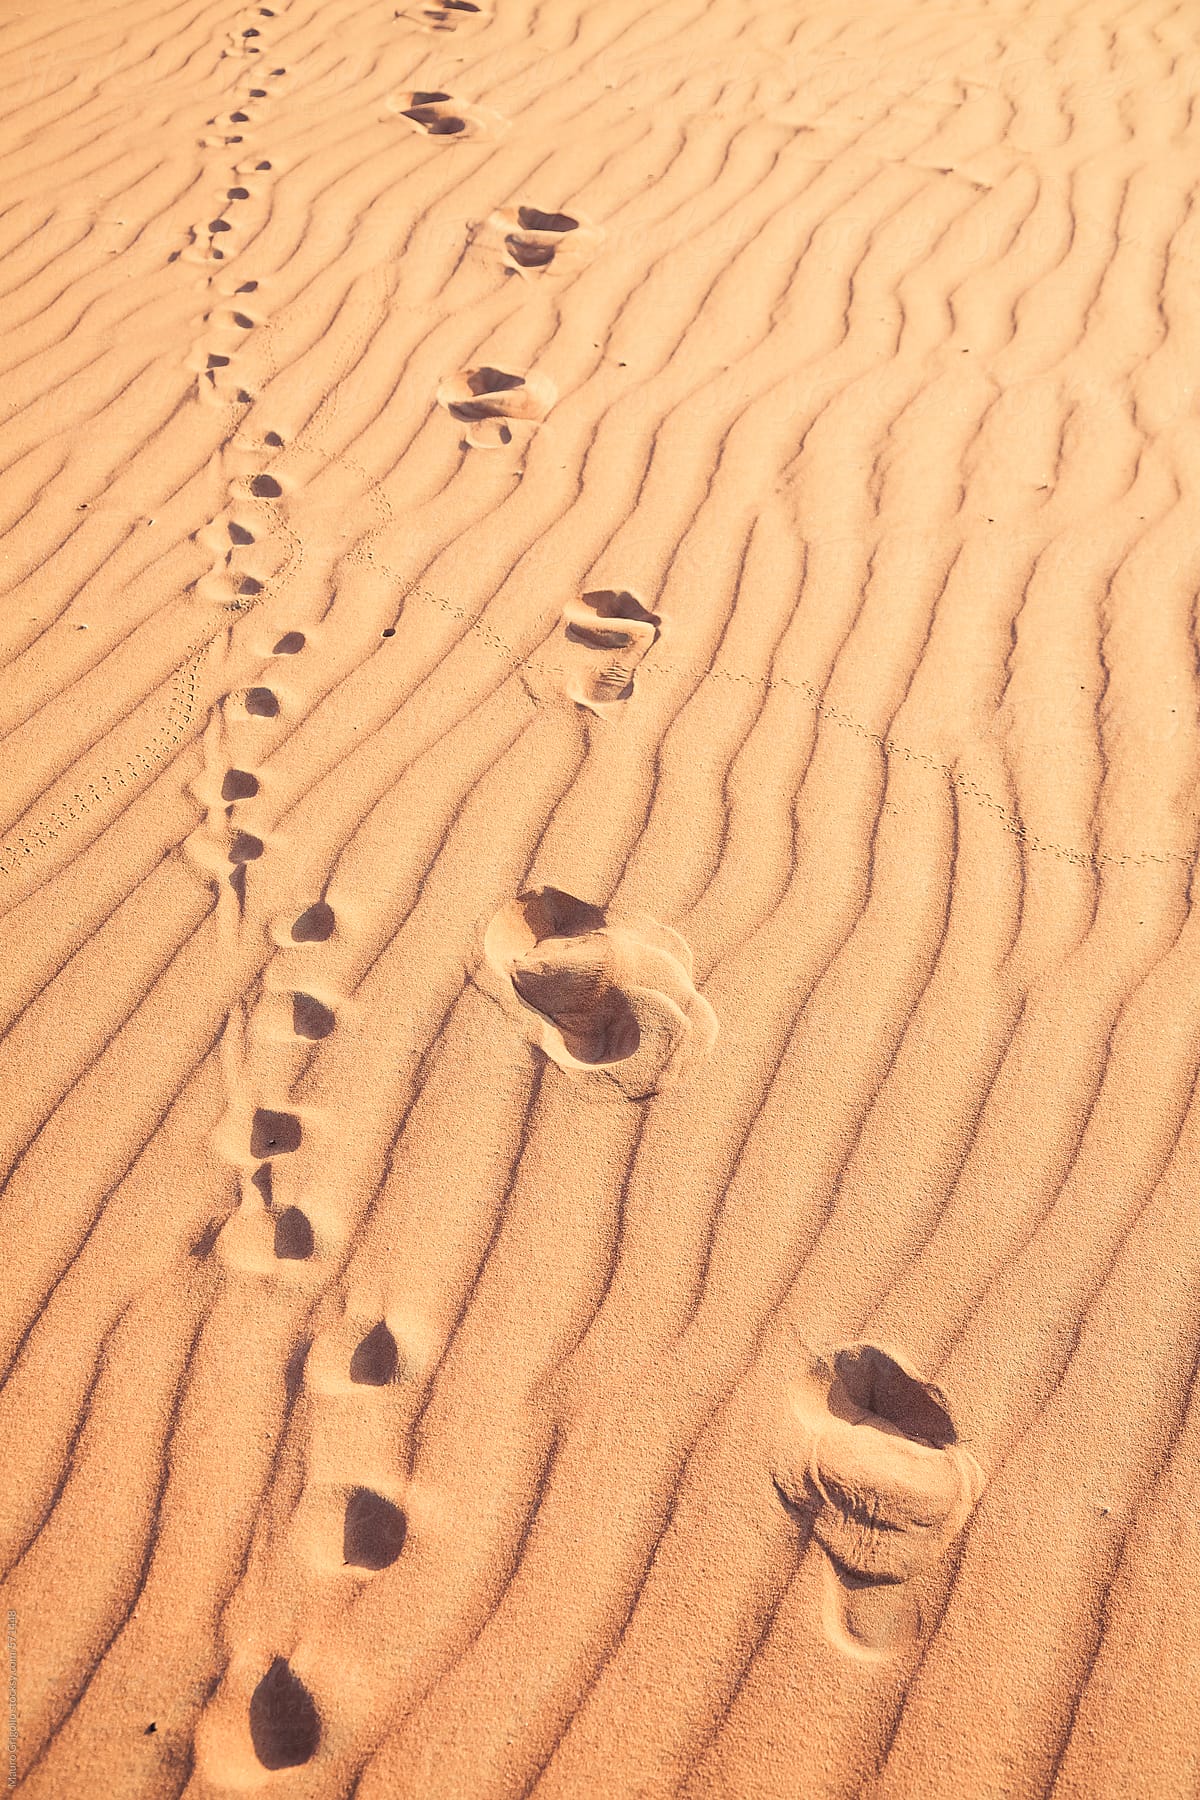 Footprints on the sand in the desert